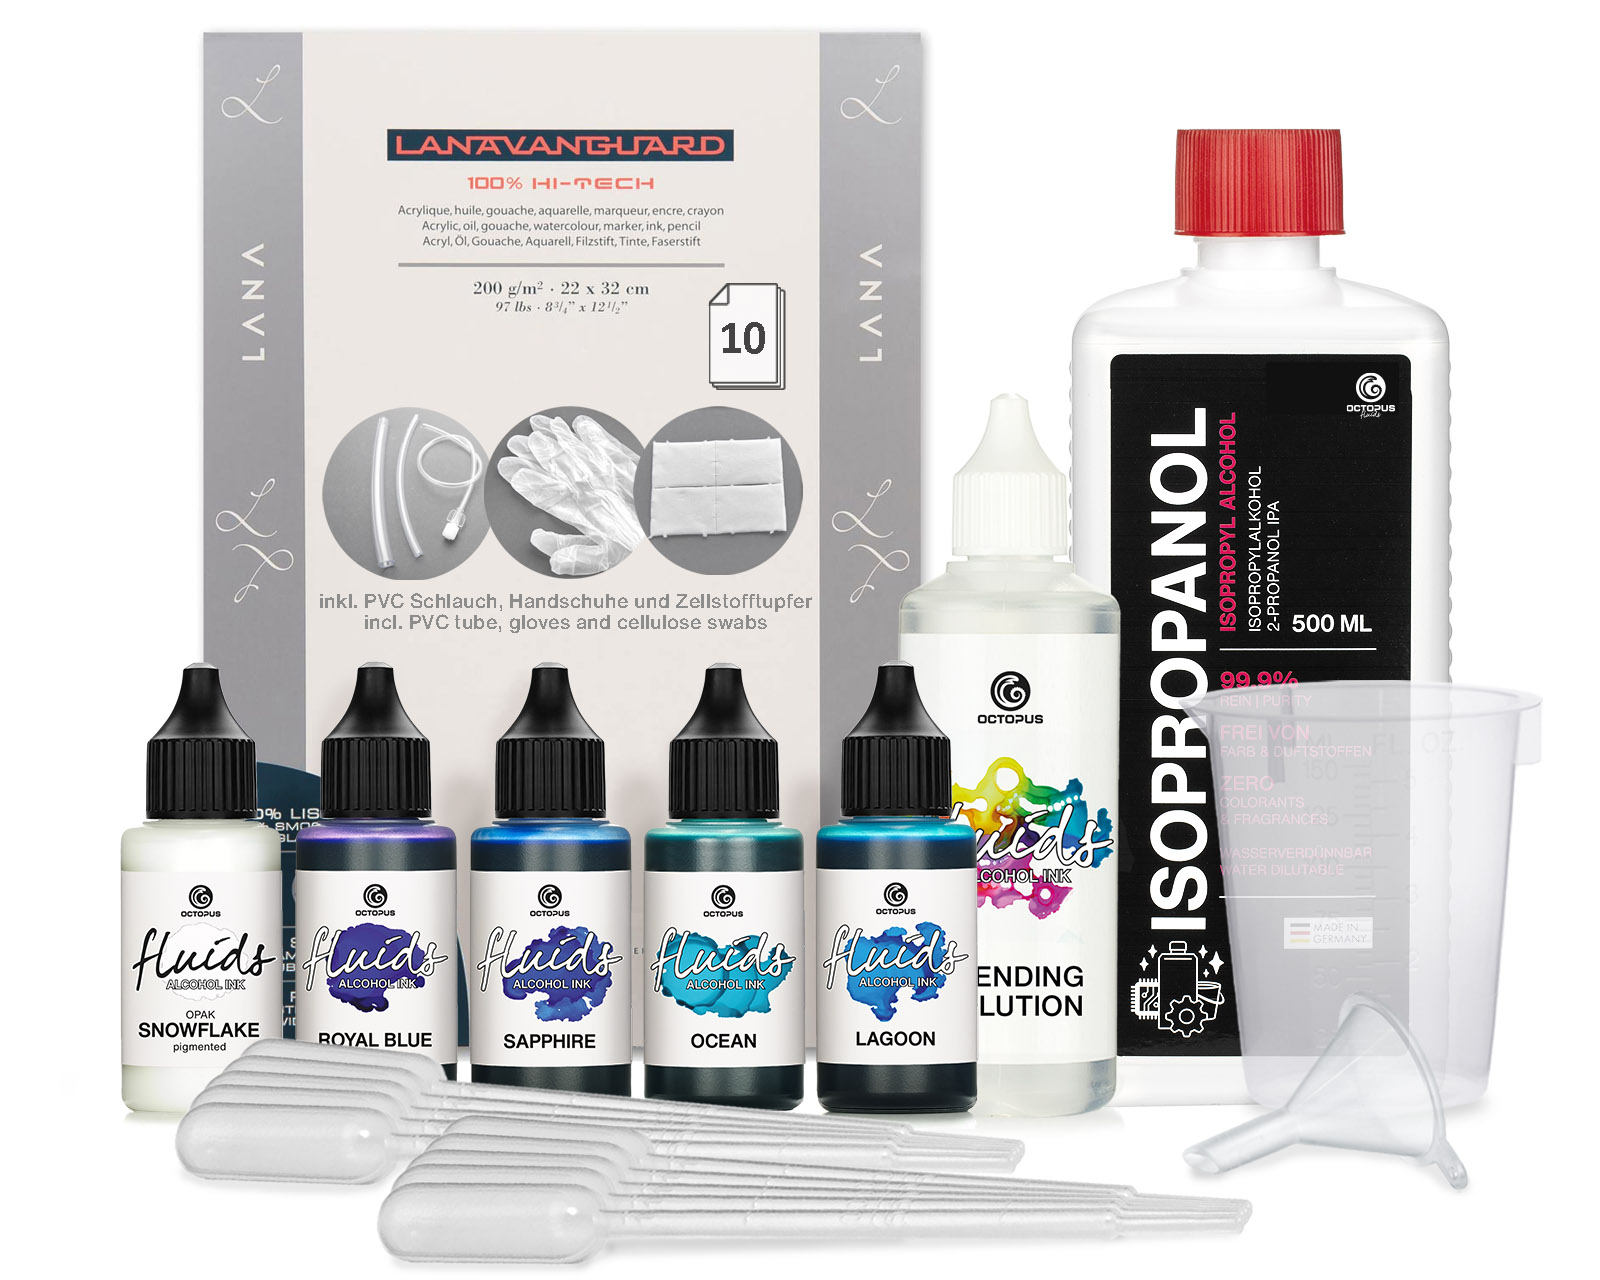 Octopus Fluids Alcohol Ink Complete Kit BREEZE with Blending Solution, Alcohol Ink Paper and accessoreies for fluid art, 5 x 30 ml